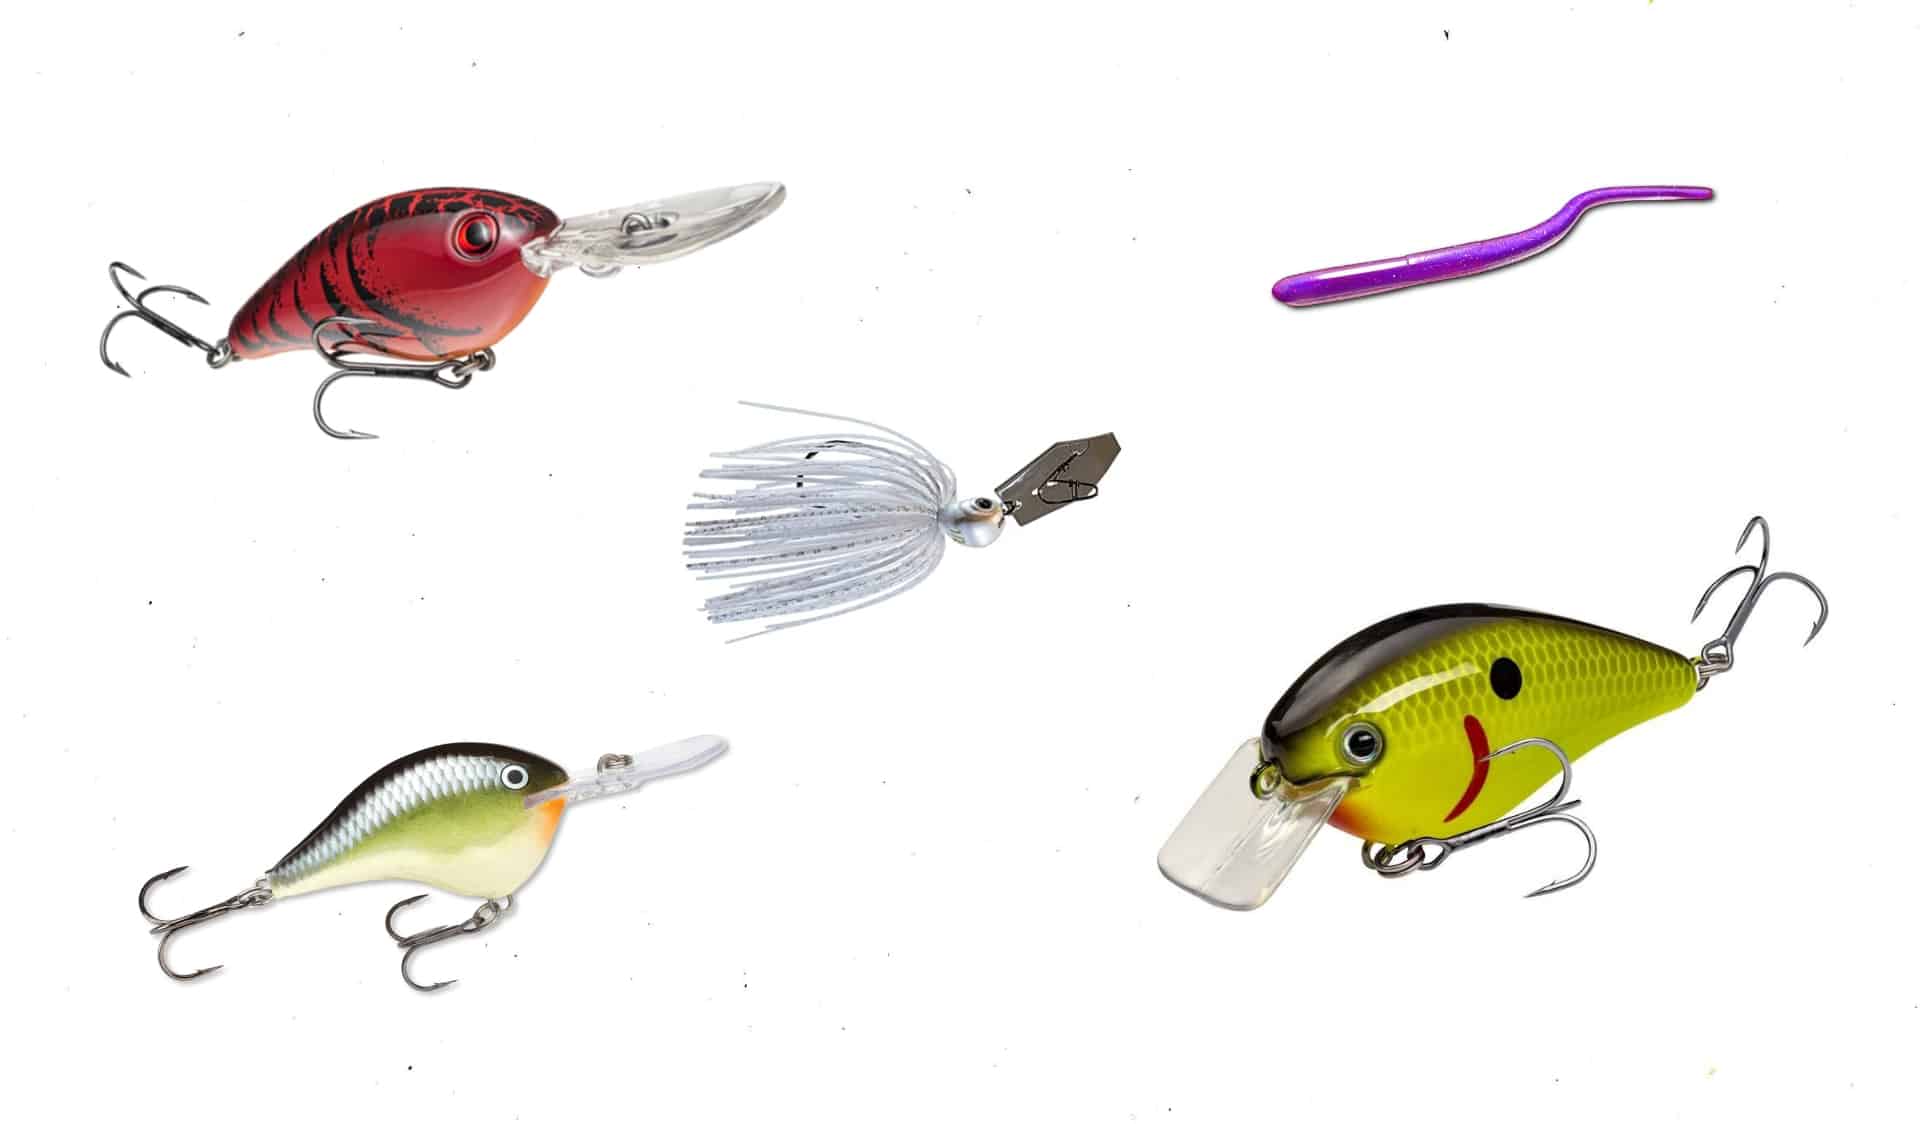 Big Bite Baits 5-Inch Super Stick Lures-Pack of 9